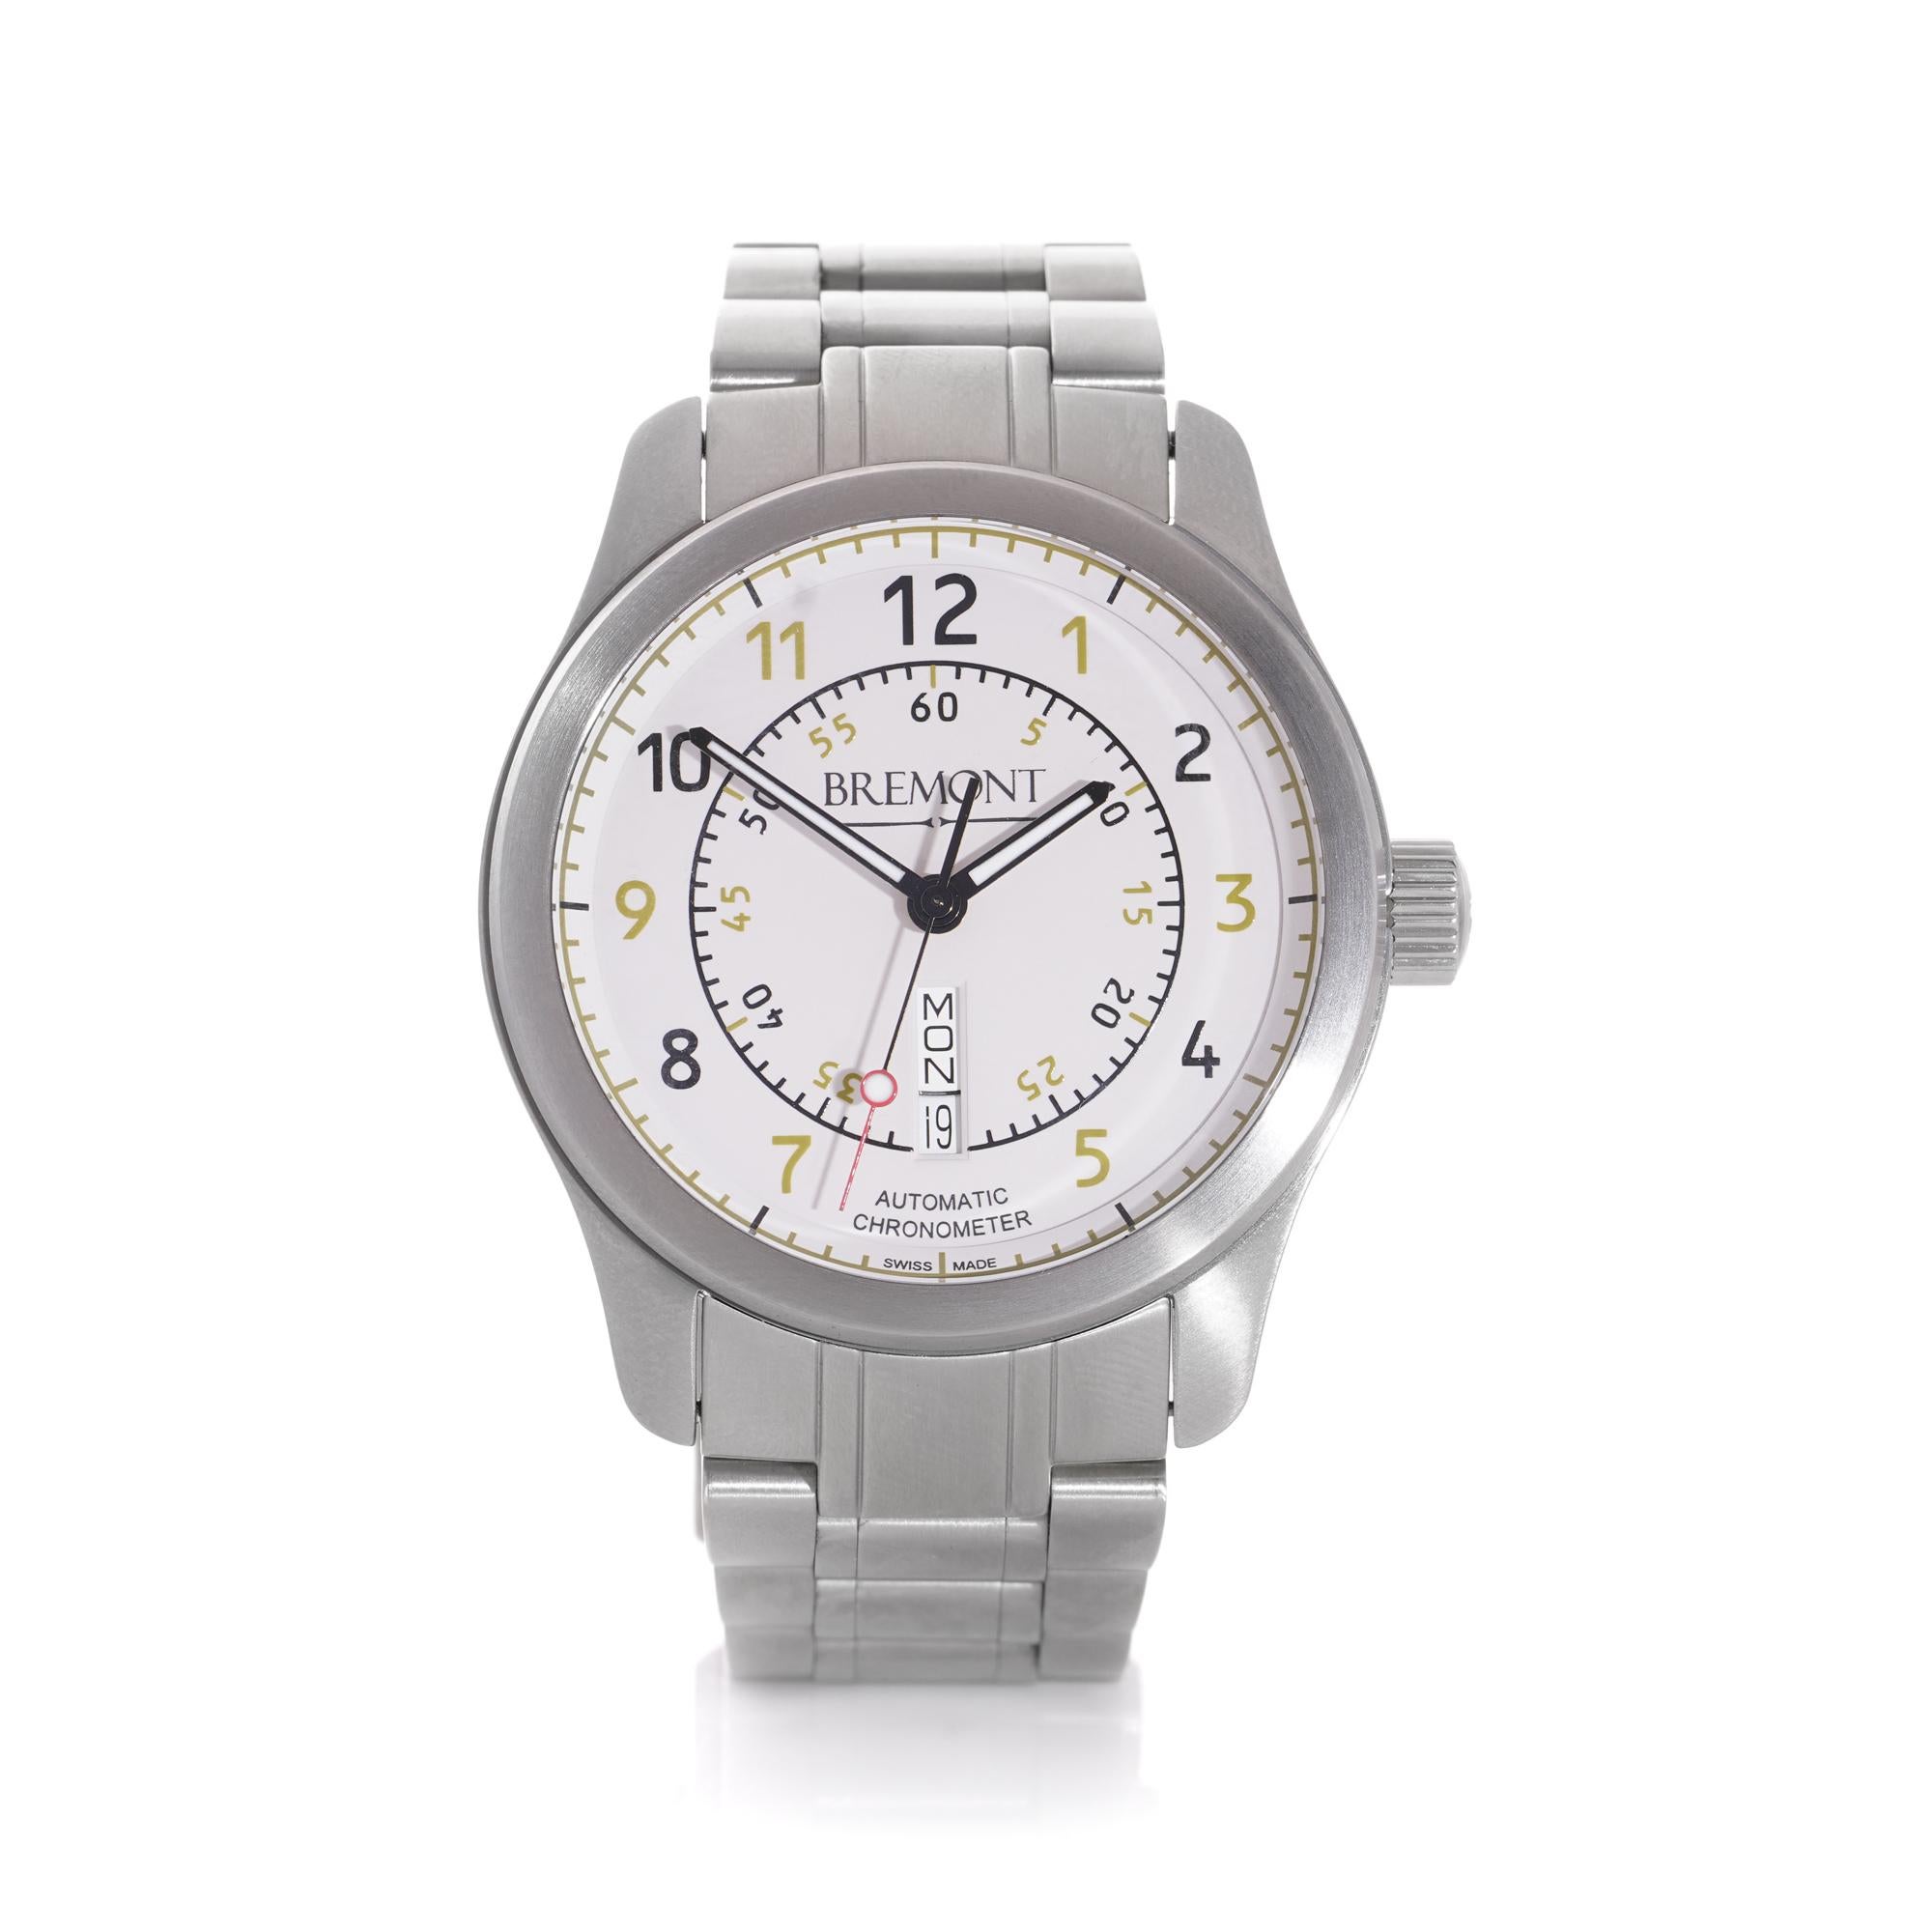 Men's Bremont Stainless Steel Day Date Chronometer,	BC-S2 men's wristwatch.  For Sale